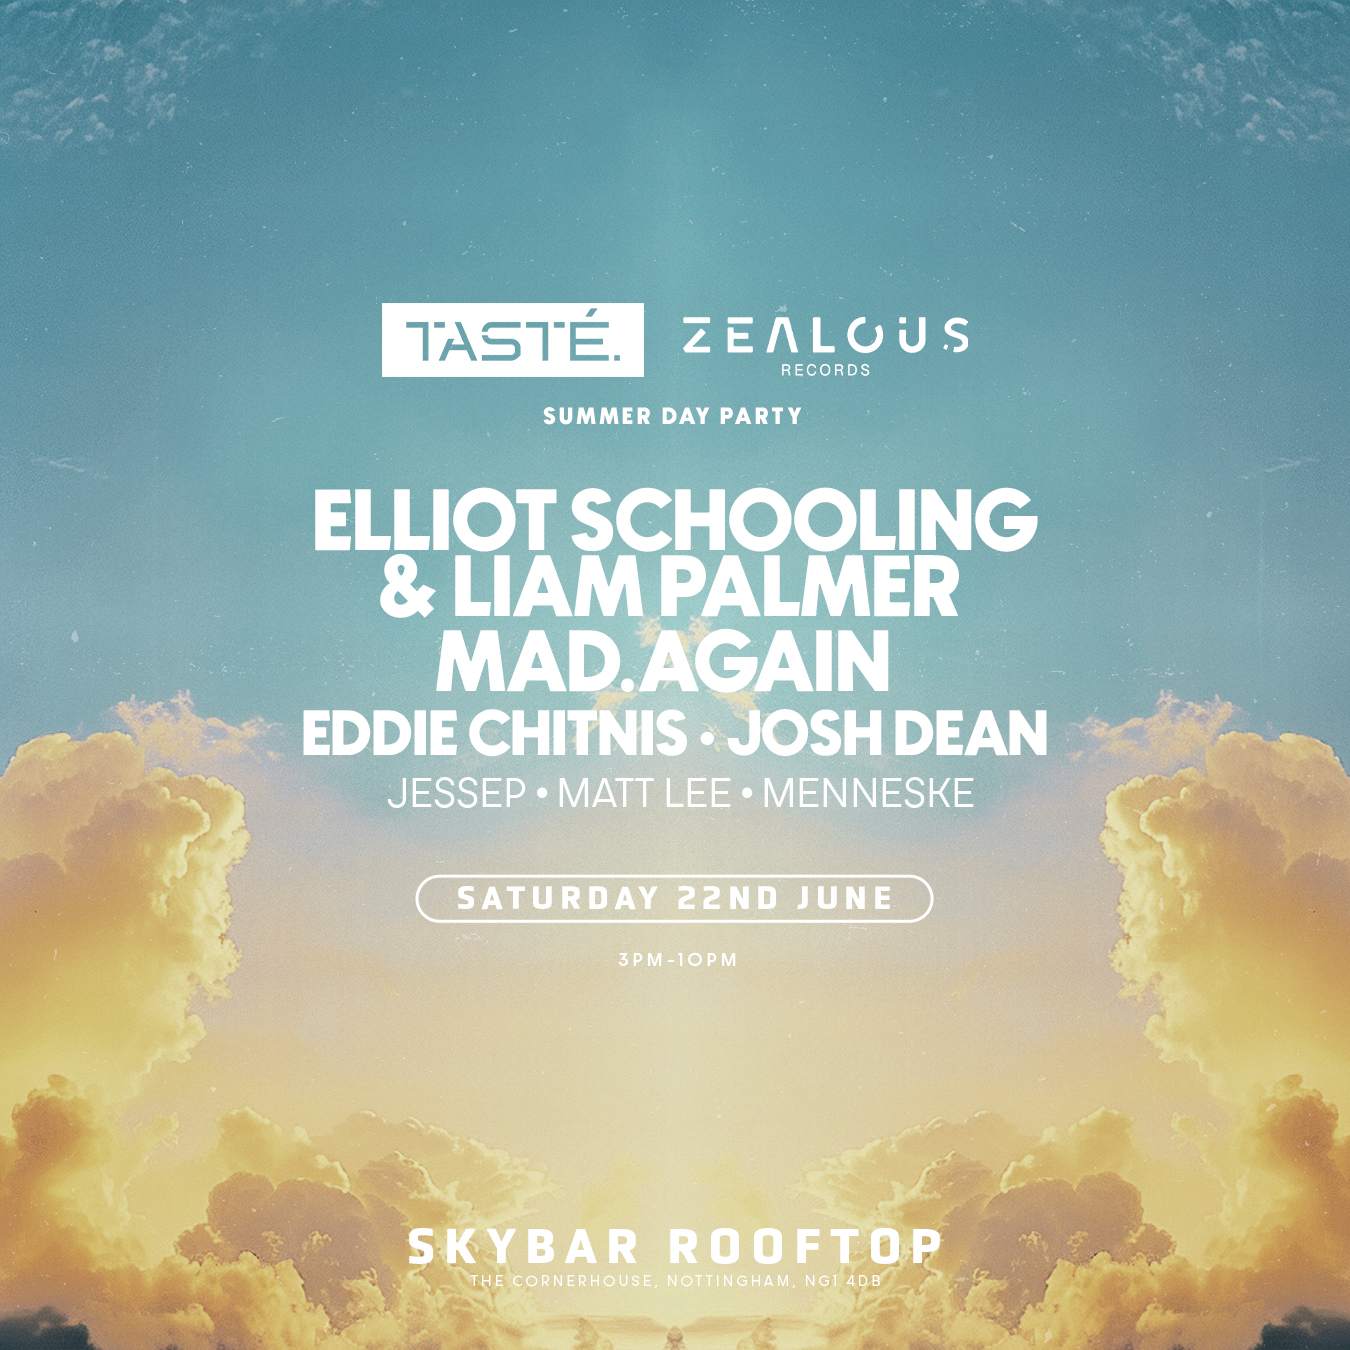 TASTÉ. X Zealous: Summer Rooftop Party with Elliot Schooling & Liam Palmer - フライヤー表